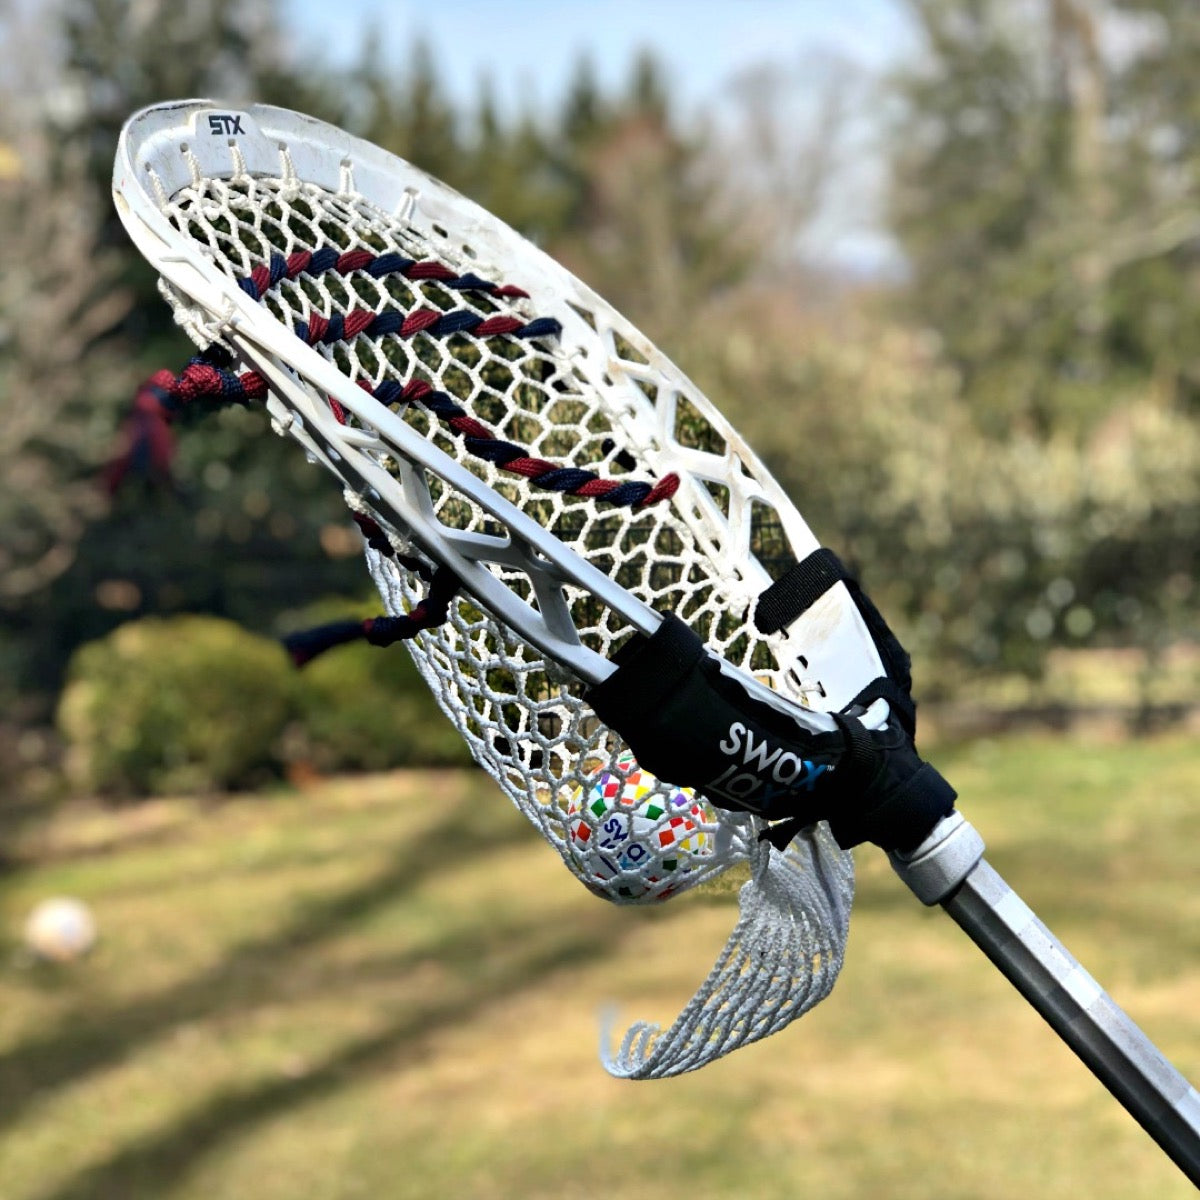 Swax Lax Power Weights shown on goalie lacrosse stick - side view